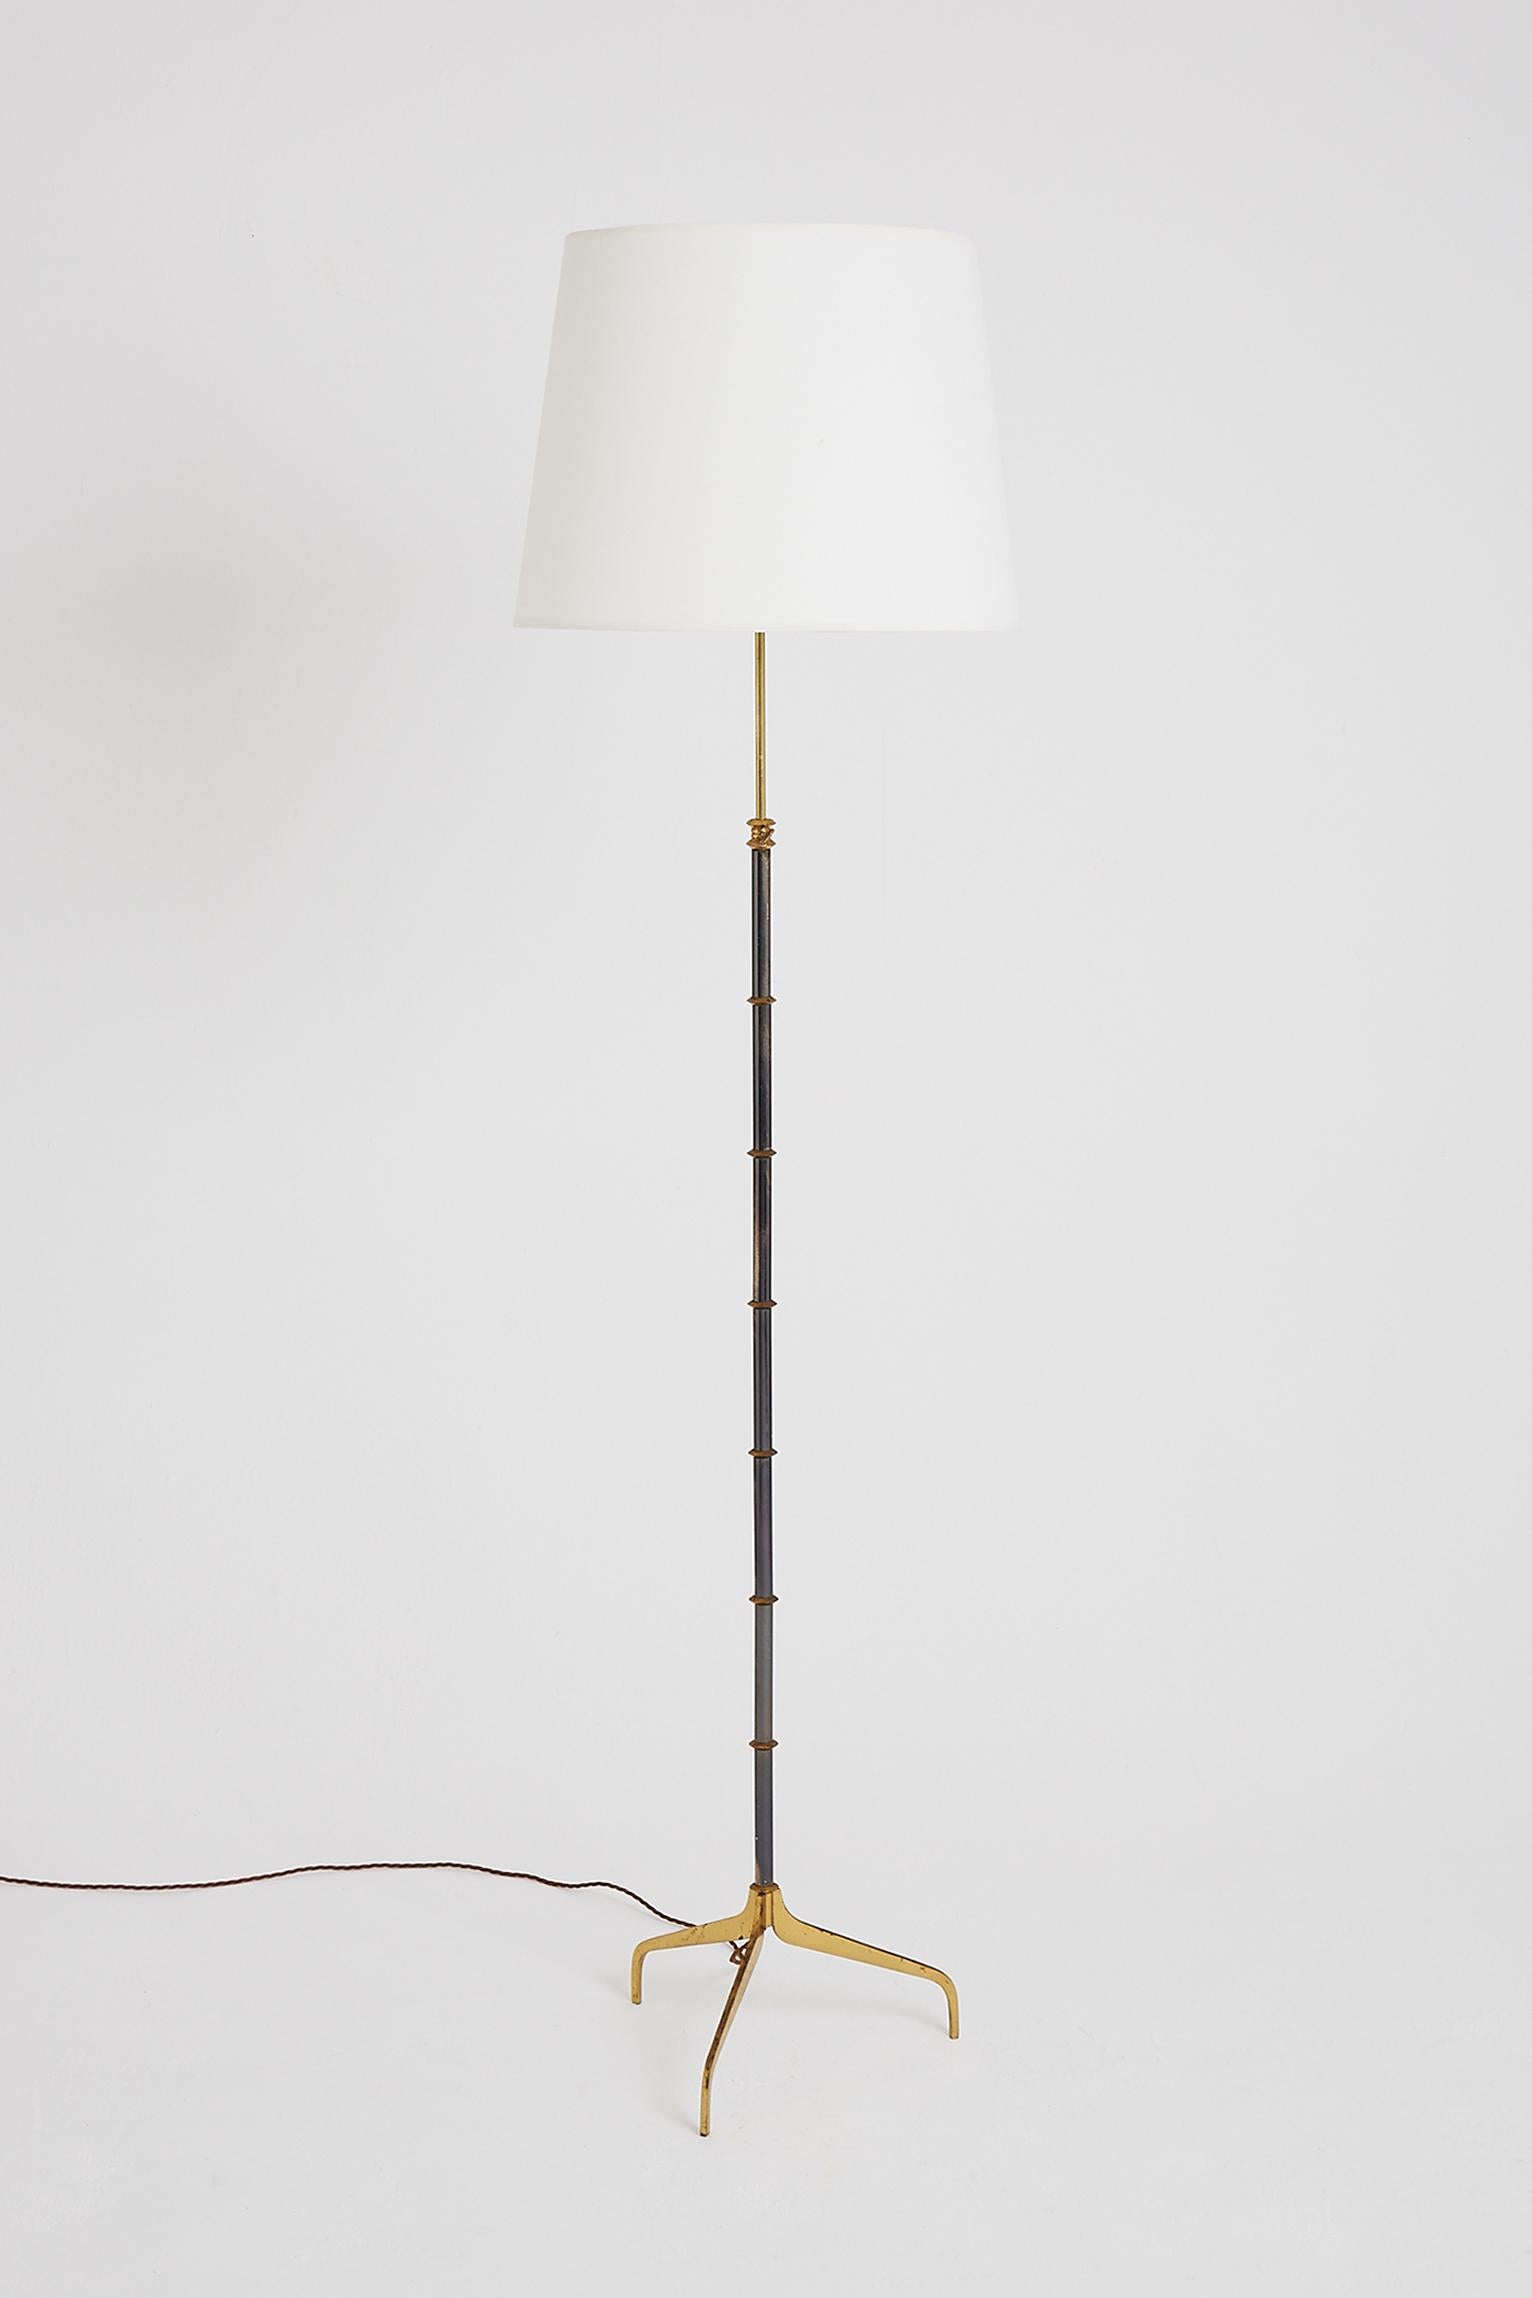 A brass and gunmetal telescopic floor lamp.
France, circa 1950.
With the shade: 186 cm tall by 46 cm diameter.
Lamp base only: ranging from 125 to 185 cm tall, 41 cm diameter base.